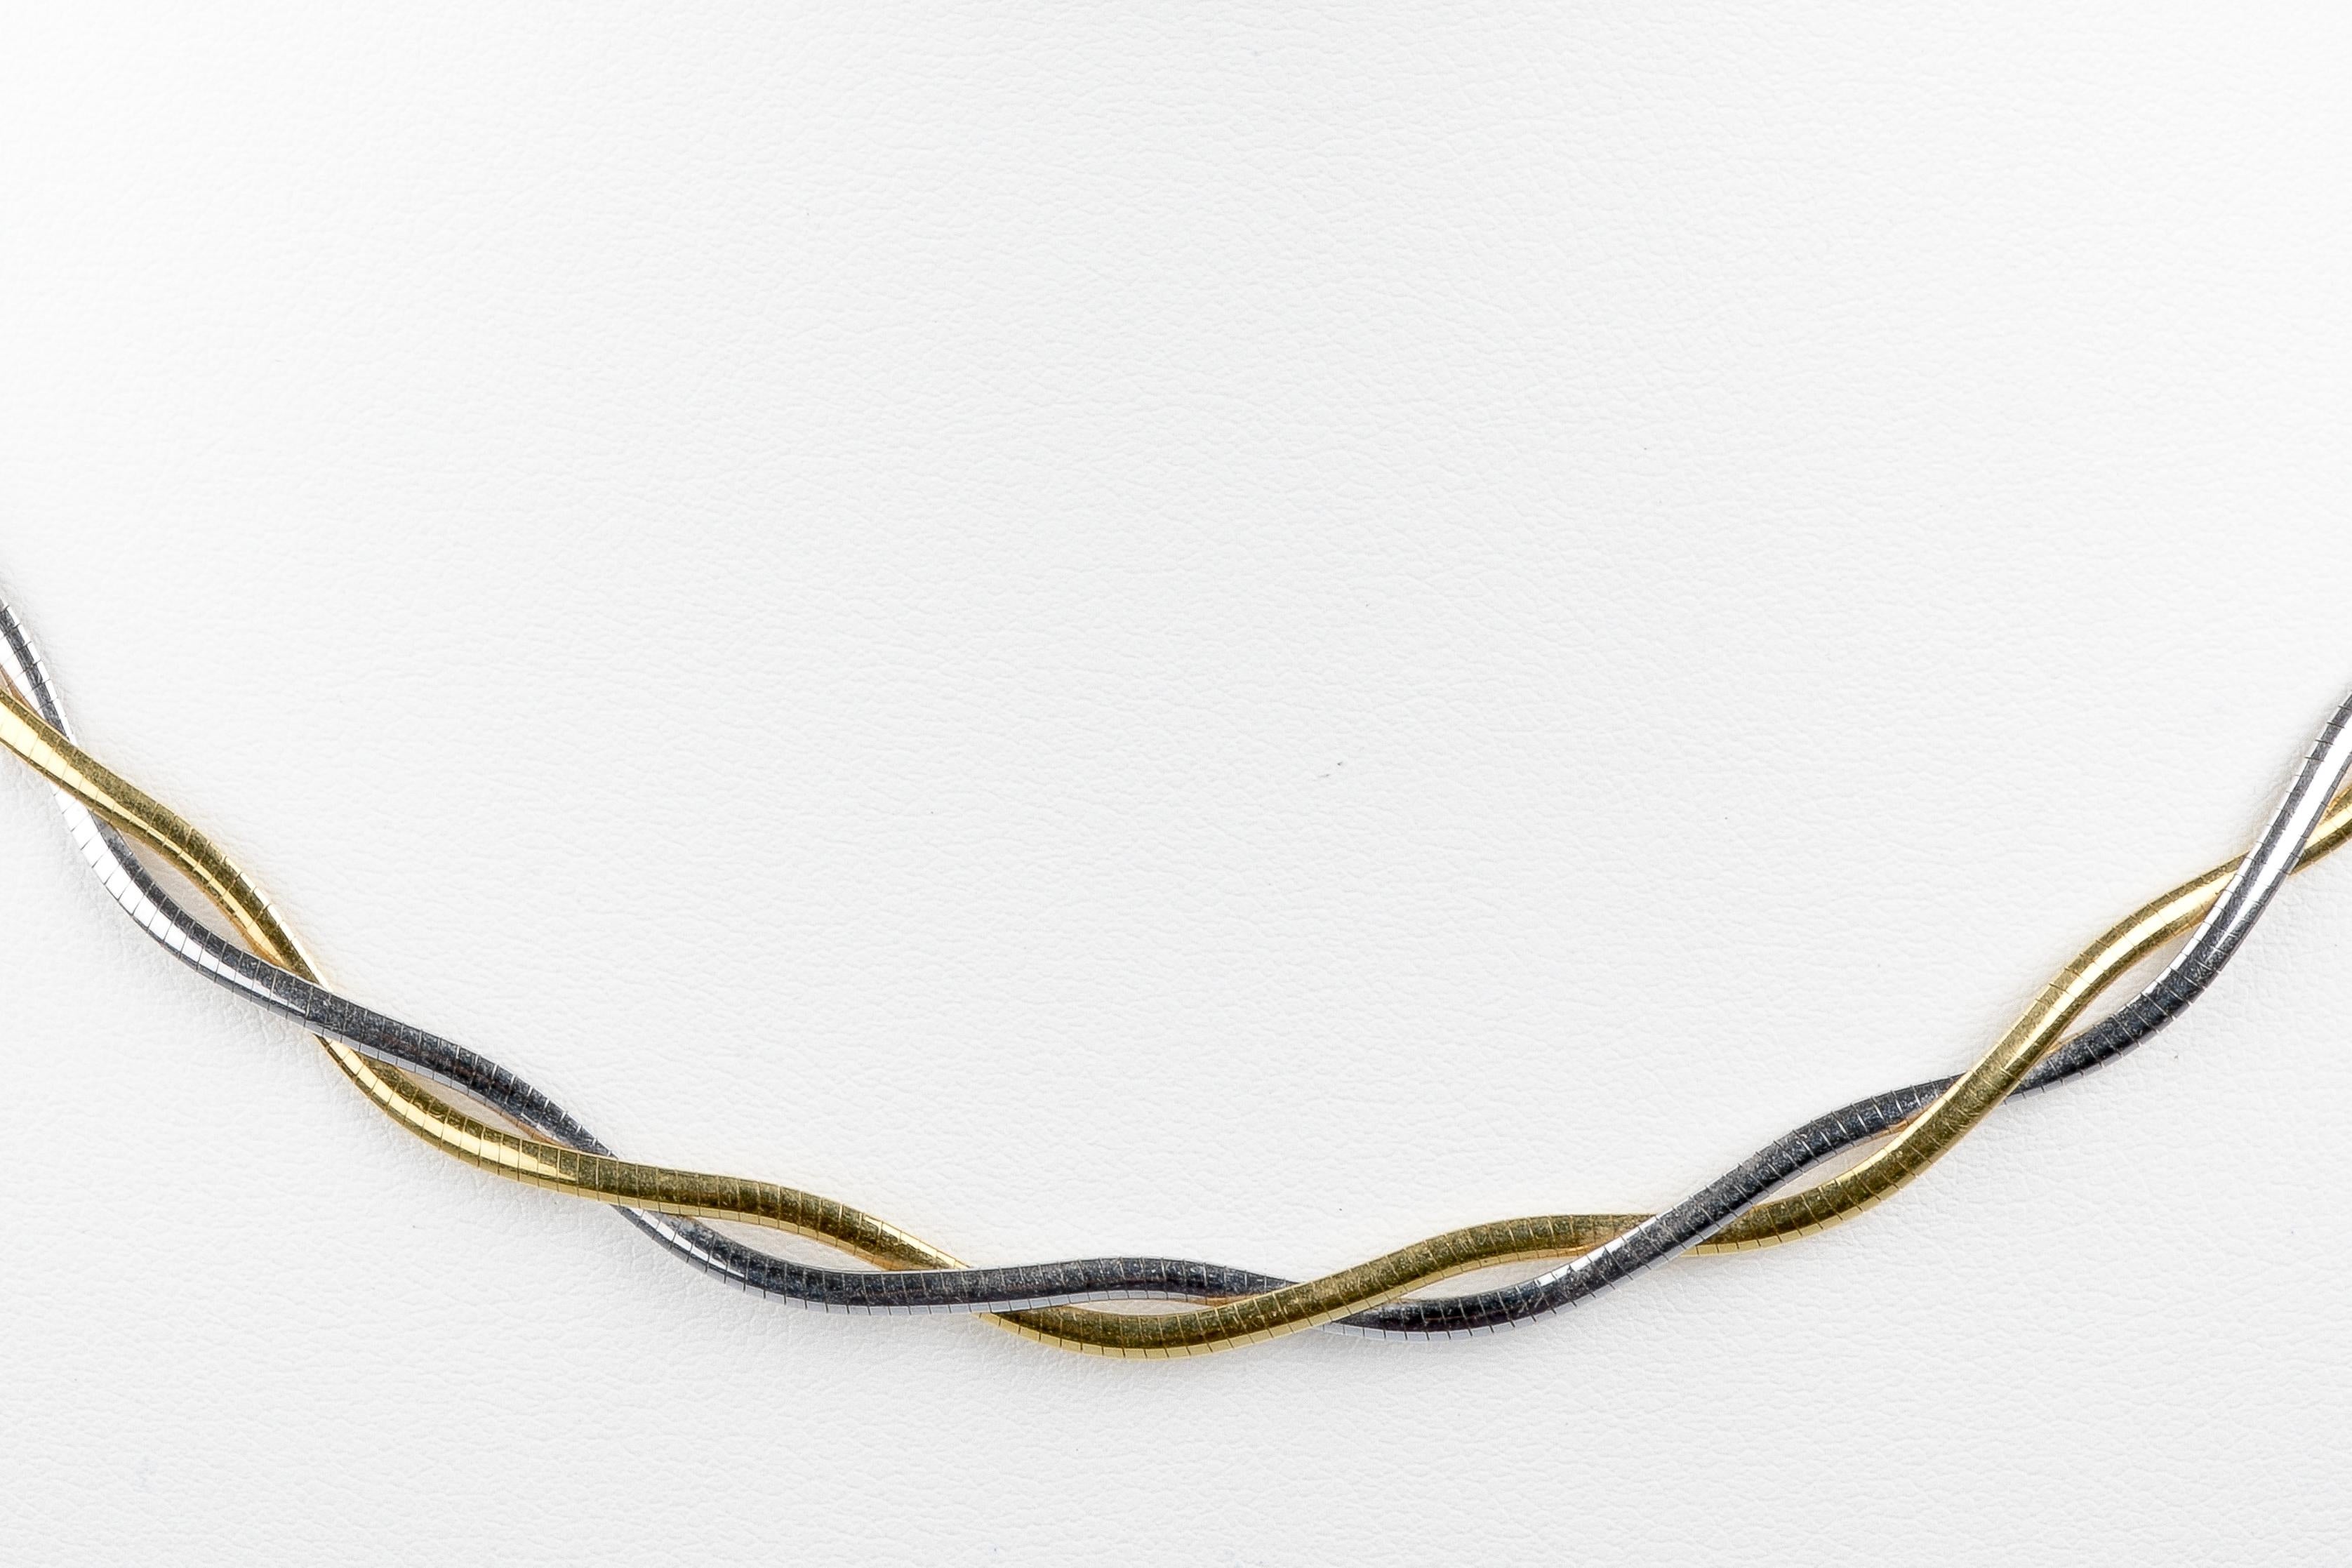 18 carat yellow and white gold necklace designed with a braided mesh and a lobster clasp.

Weight : 15.10 gr. 

Dimensions : 41.50 x 0.46 x 0.10 cm

Jewel delivered in a luxurious box with a certificate of authenticity Monte-Carlo Bijoux.